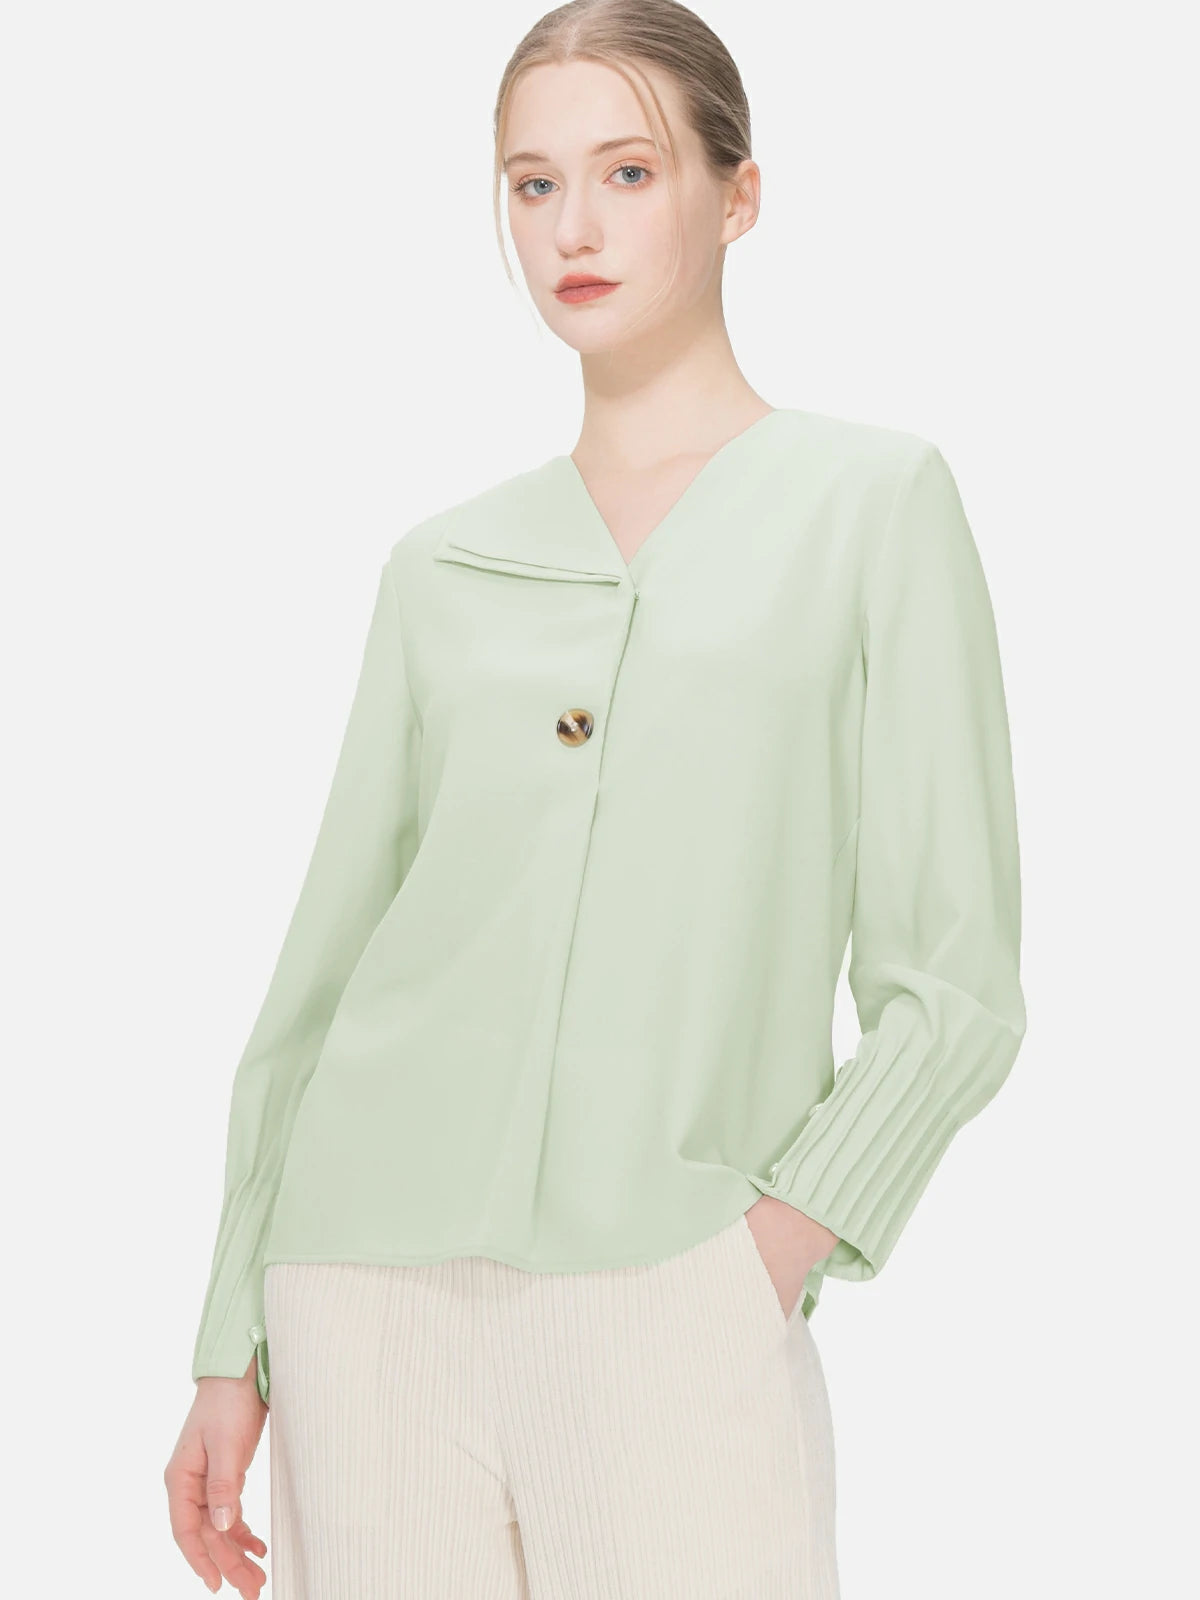 Experience feminine elegance in this V-neck chiffon blouse, adorned with pleated cuffs and a refreshing green color.